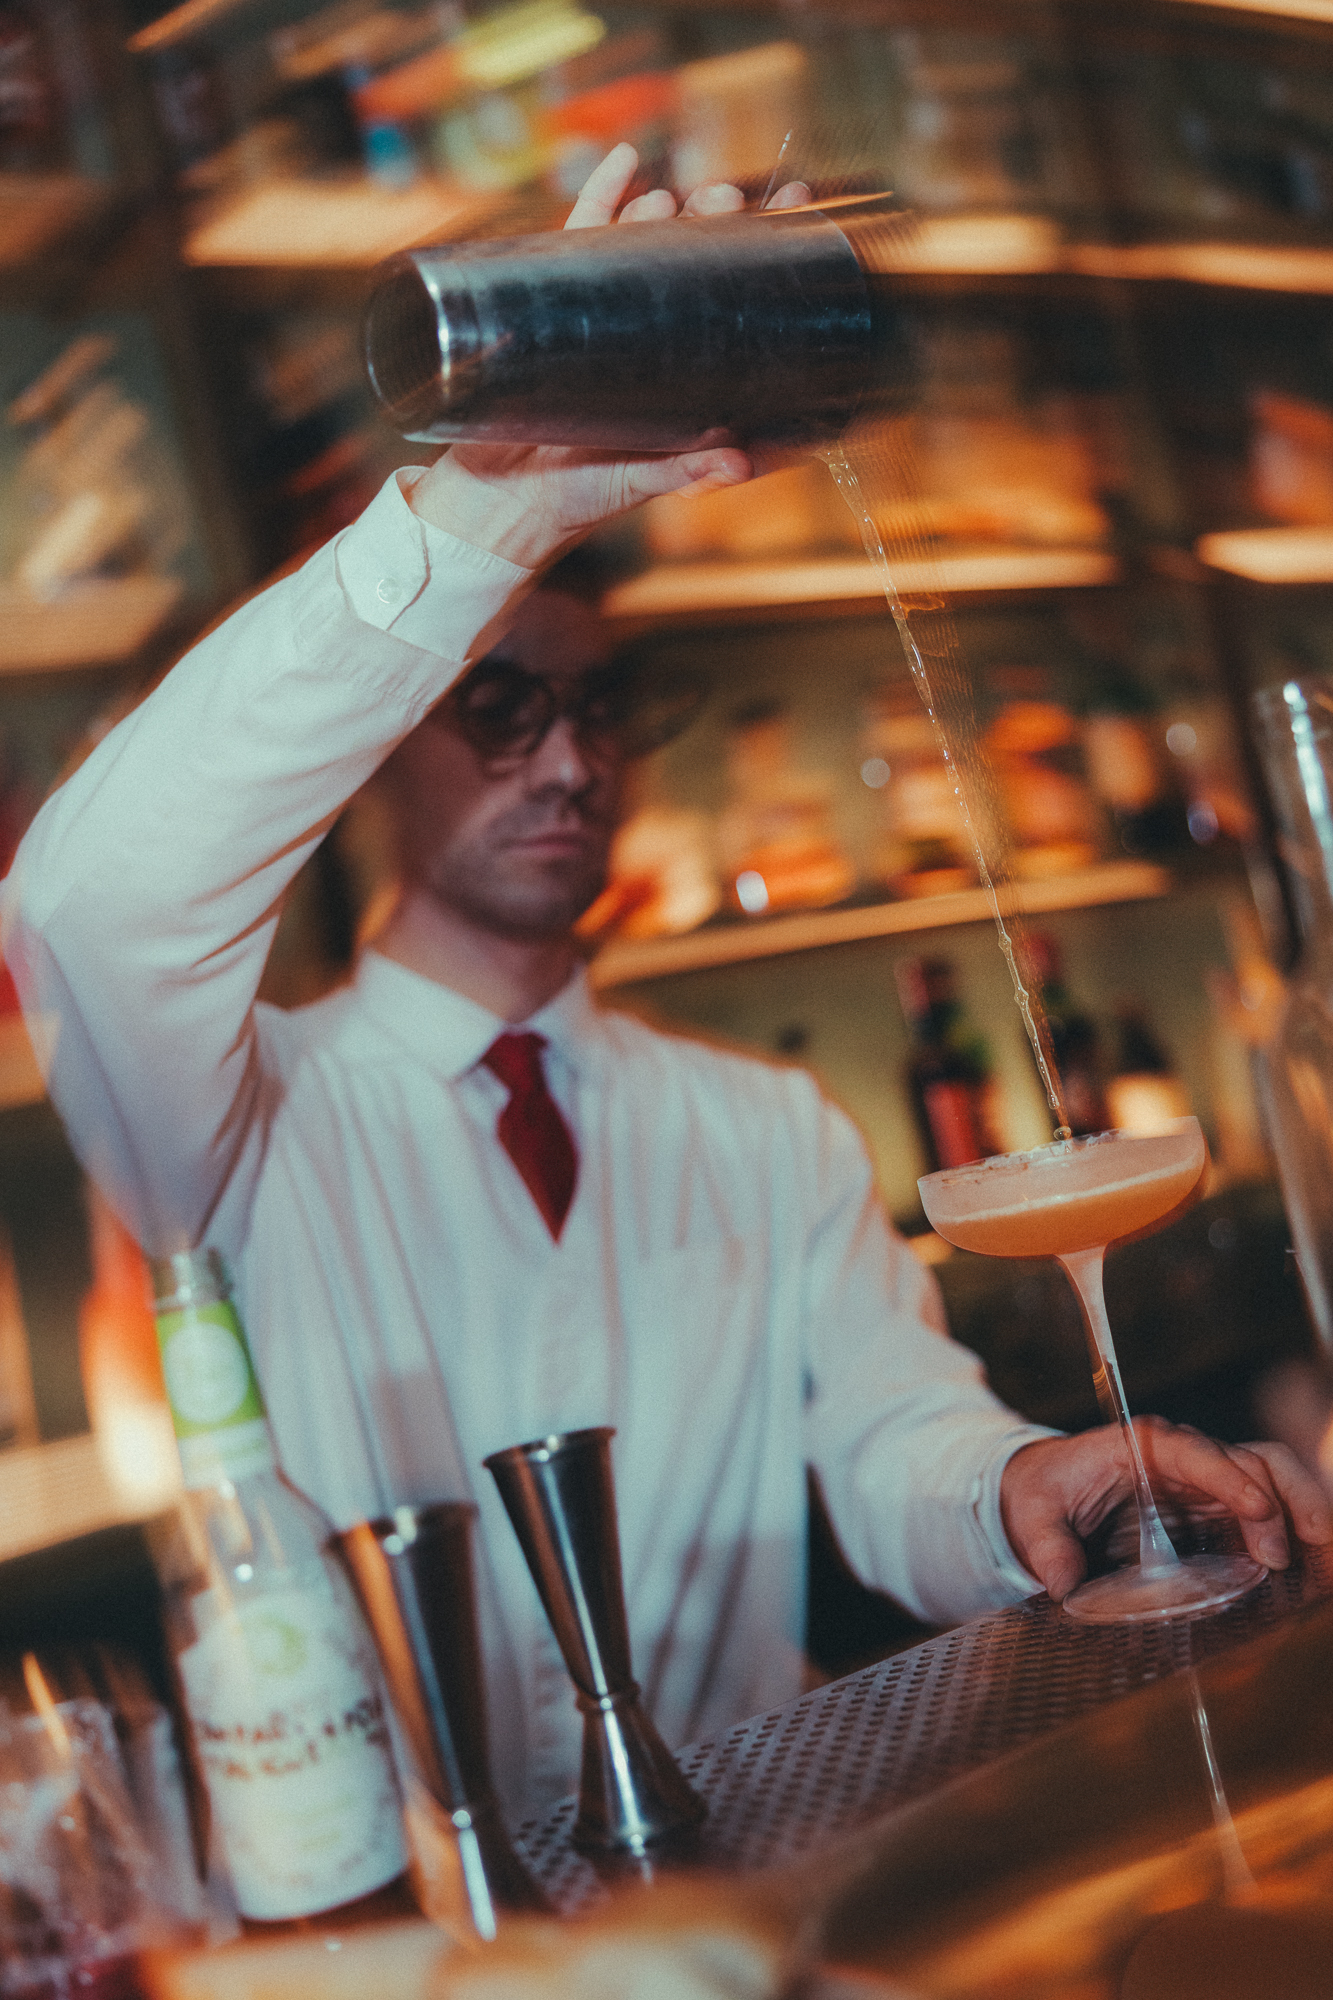 A bartender pouring a drink from the shaker at the Companion Dolce Amaro Bar.